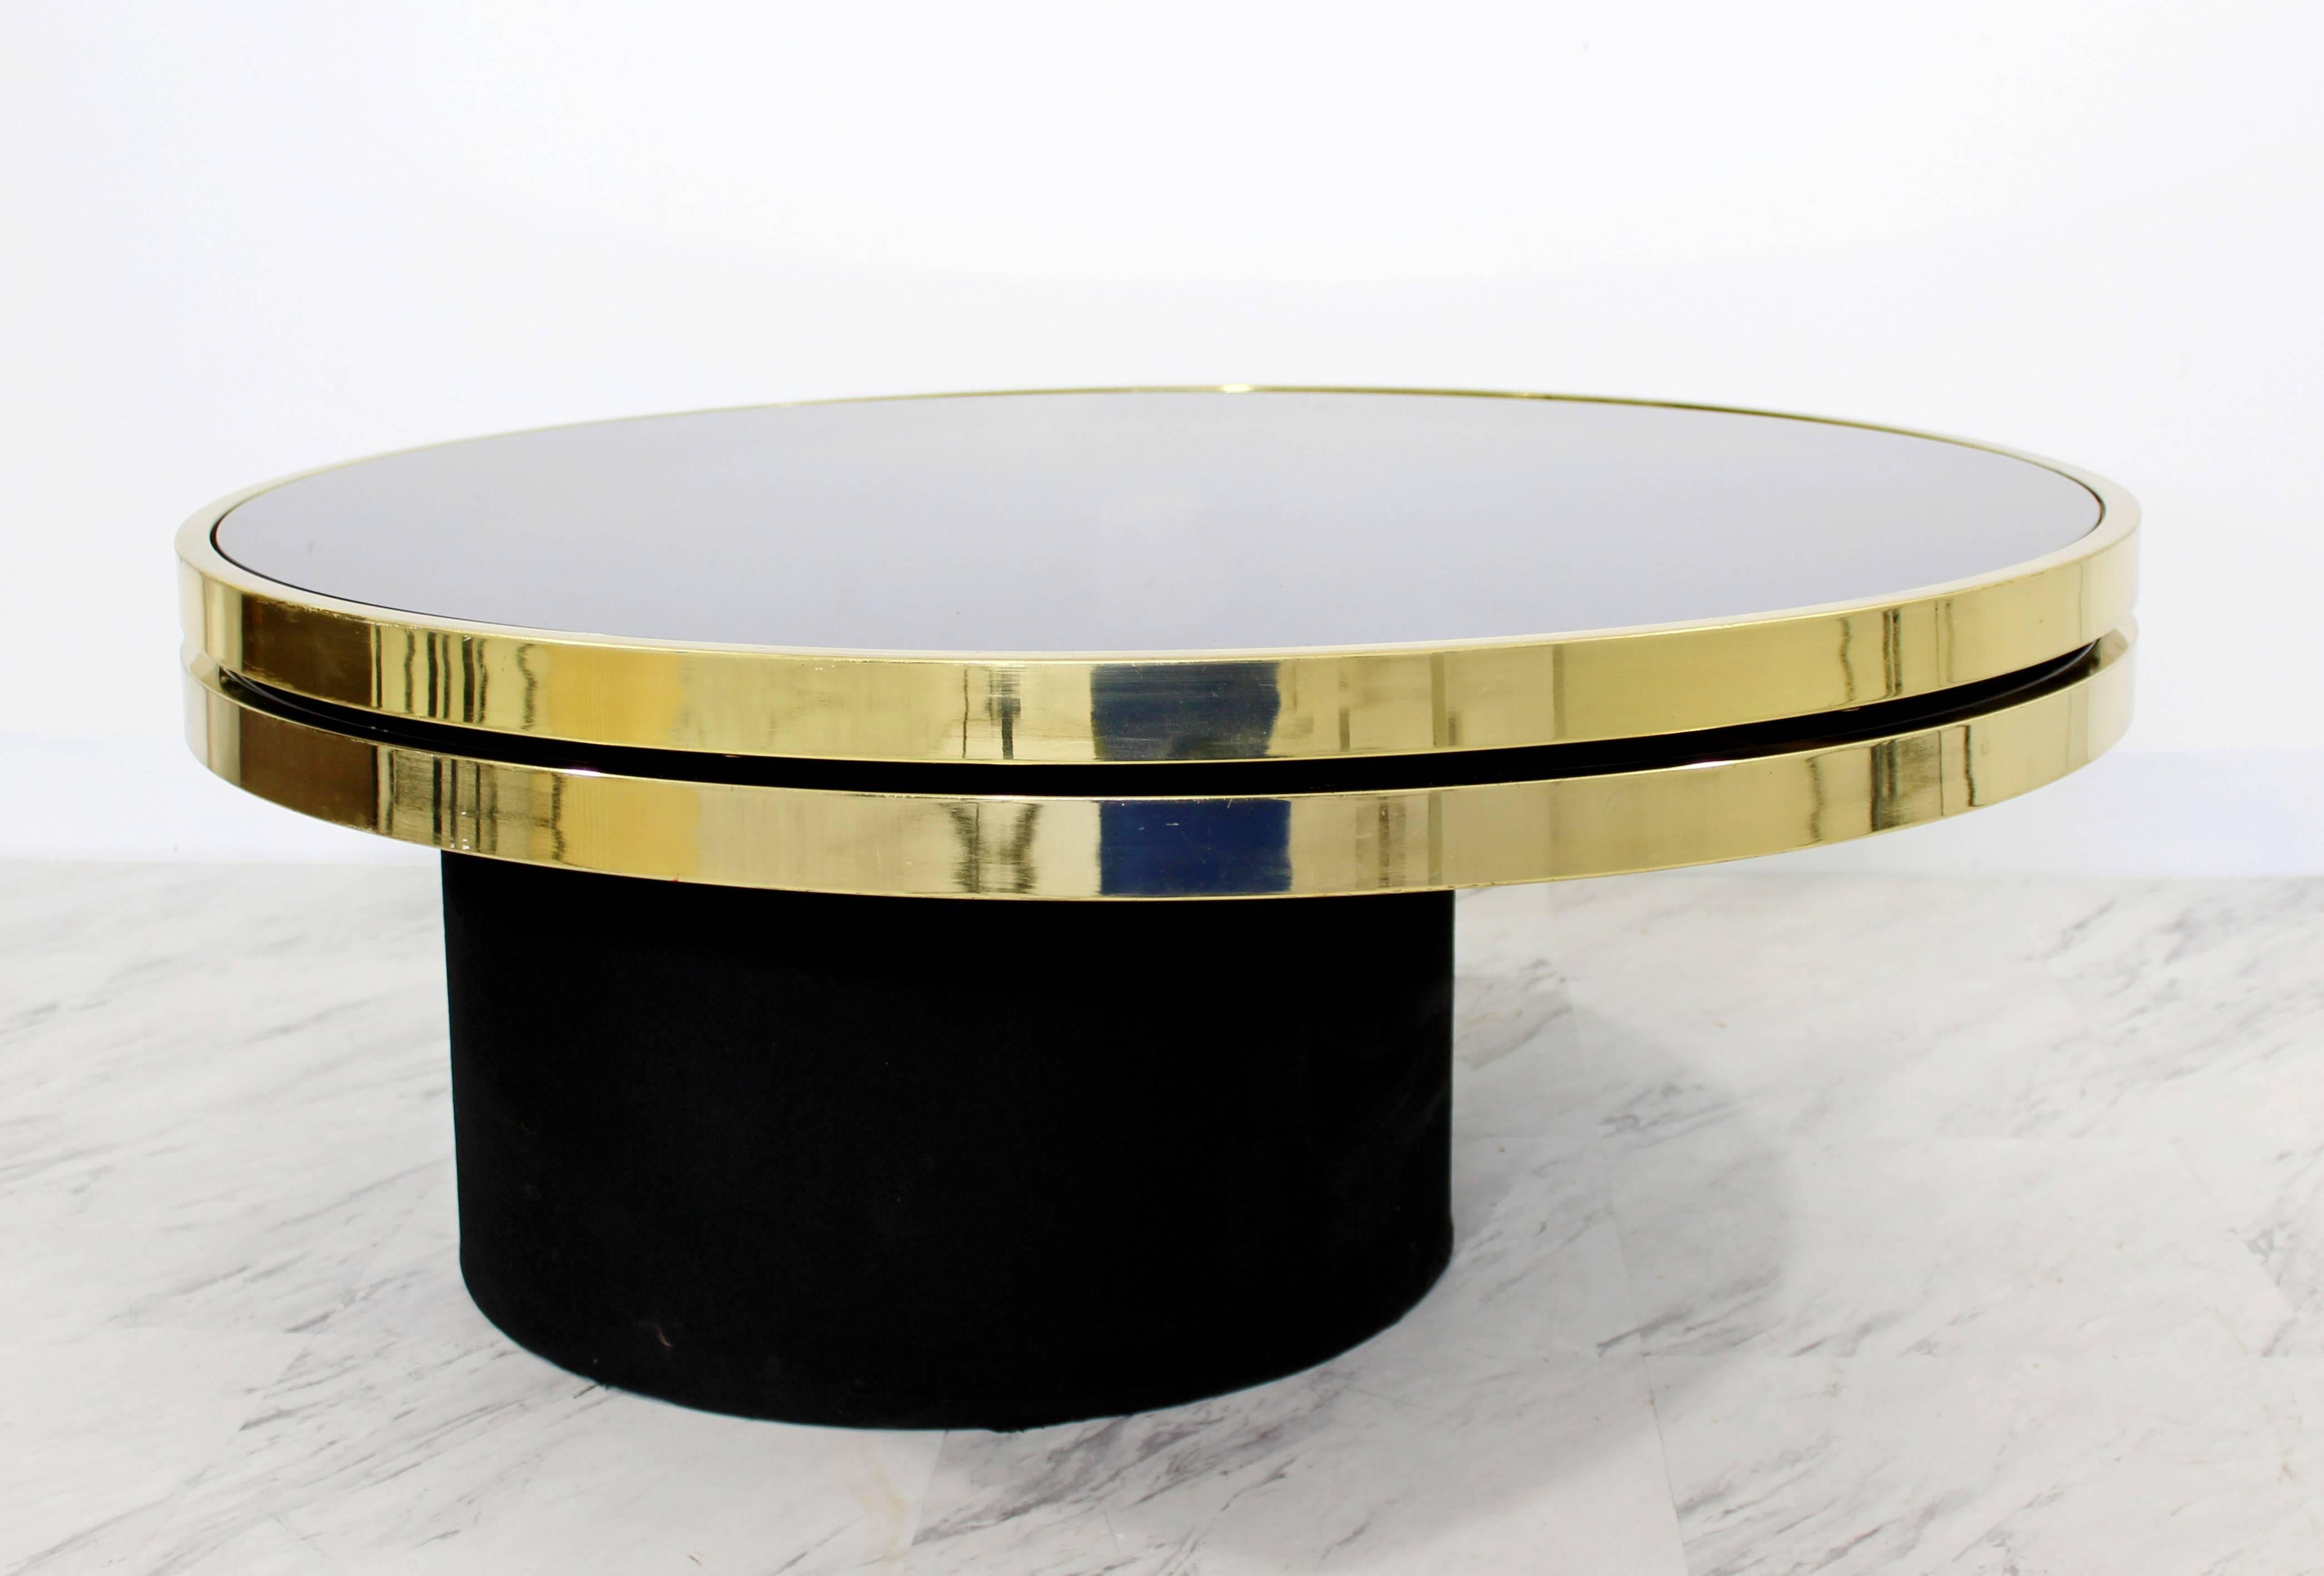 For your consideration is a magnificent, swivel coffee table, with two brass and smoked glass tiers, by the Design Institute of America, circa the 1970s. Swivel mechanism works flawlessly and the top rotates with ease. In excellent condition. The